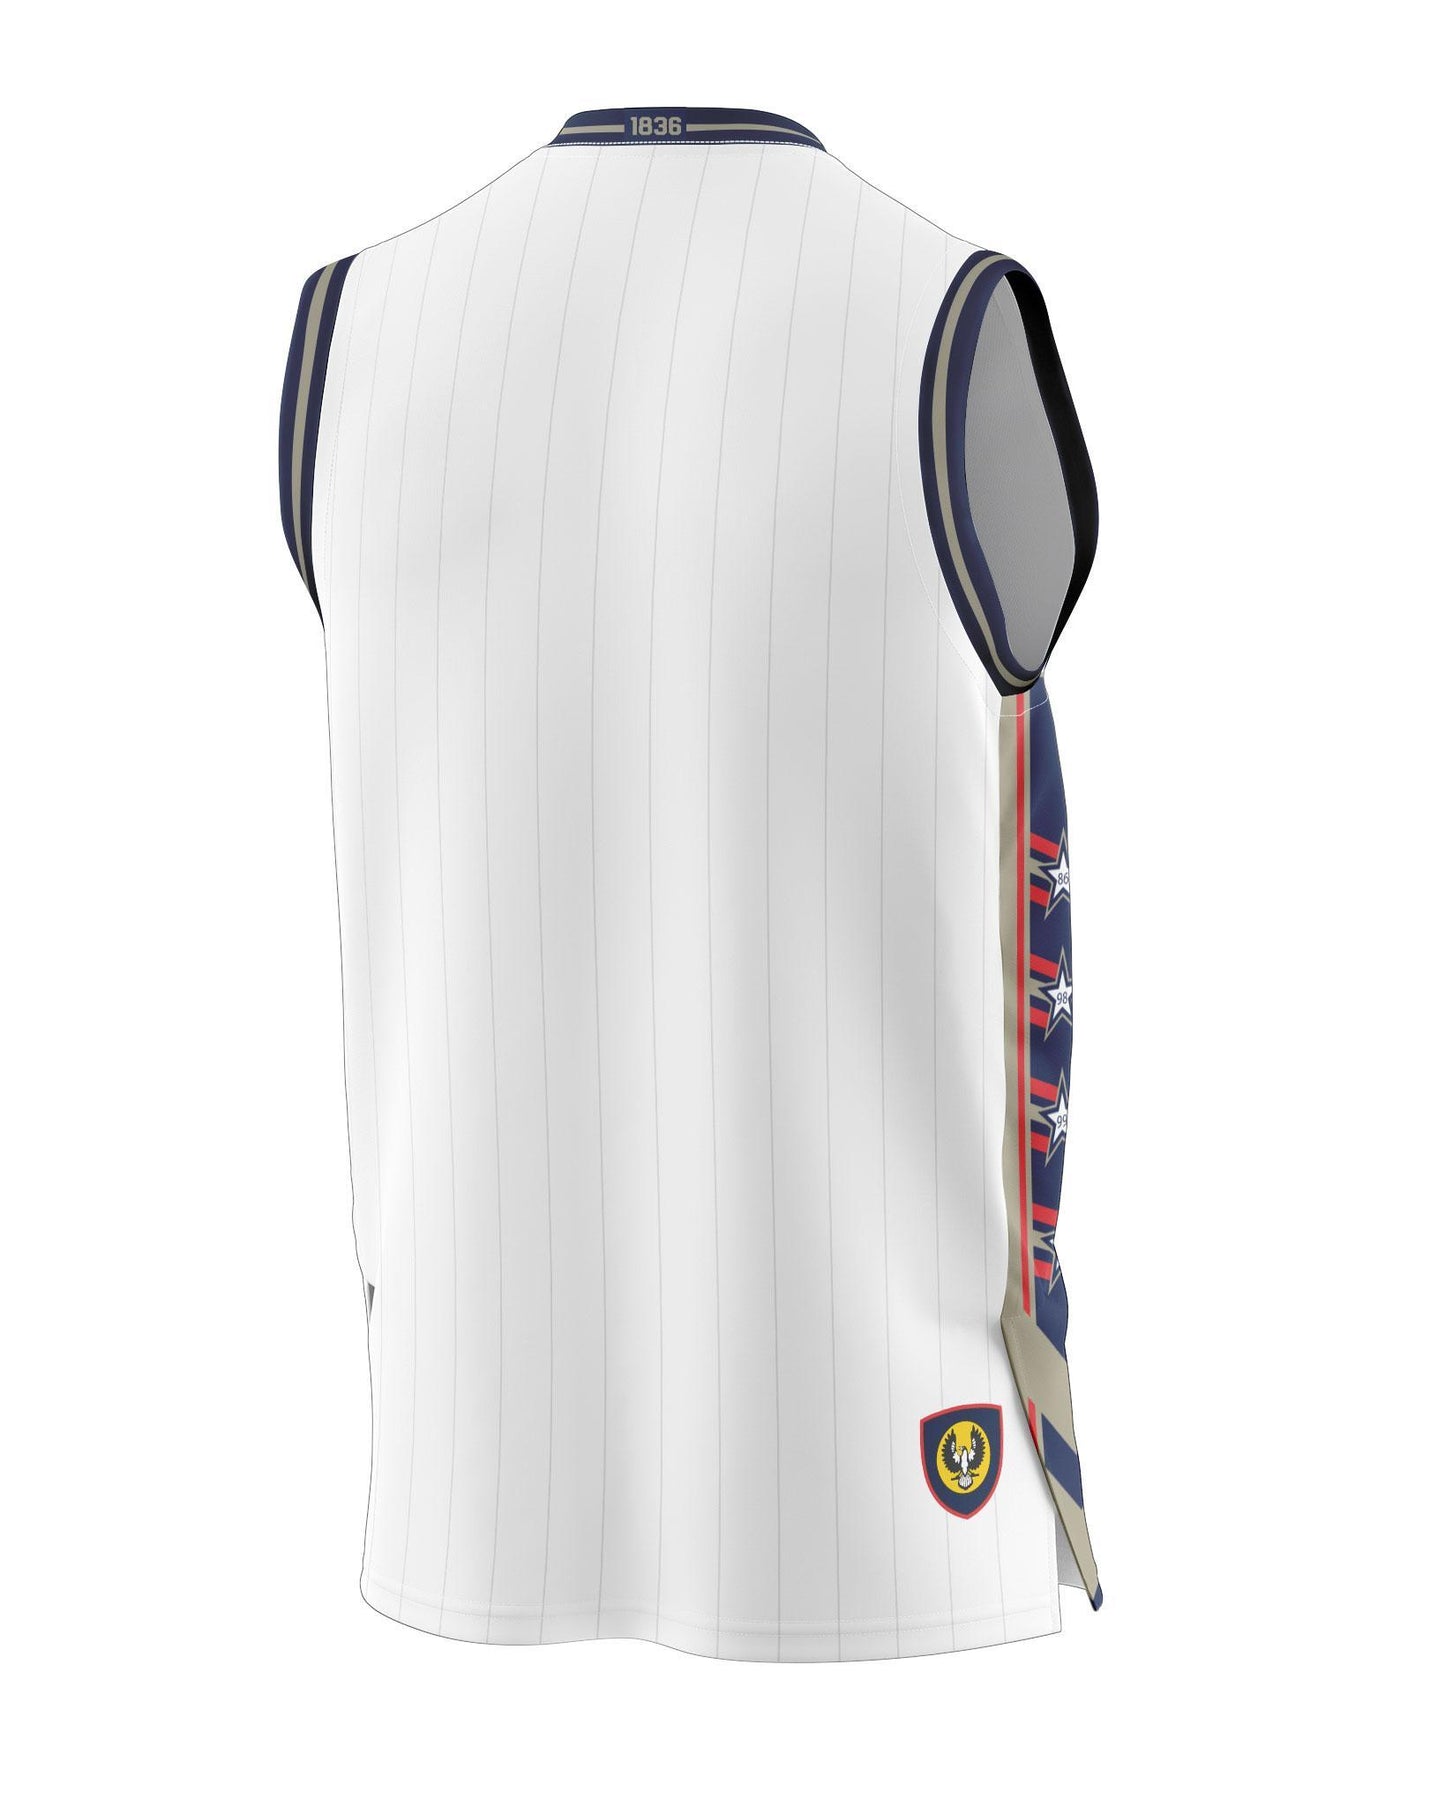 Adelaide 36ers 2021/22 Authentic Adult Away Jersey - Adelaide 36ers